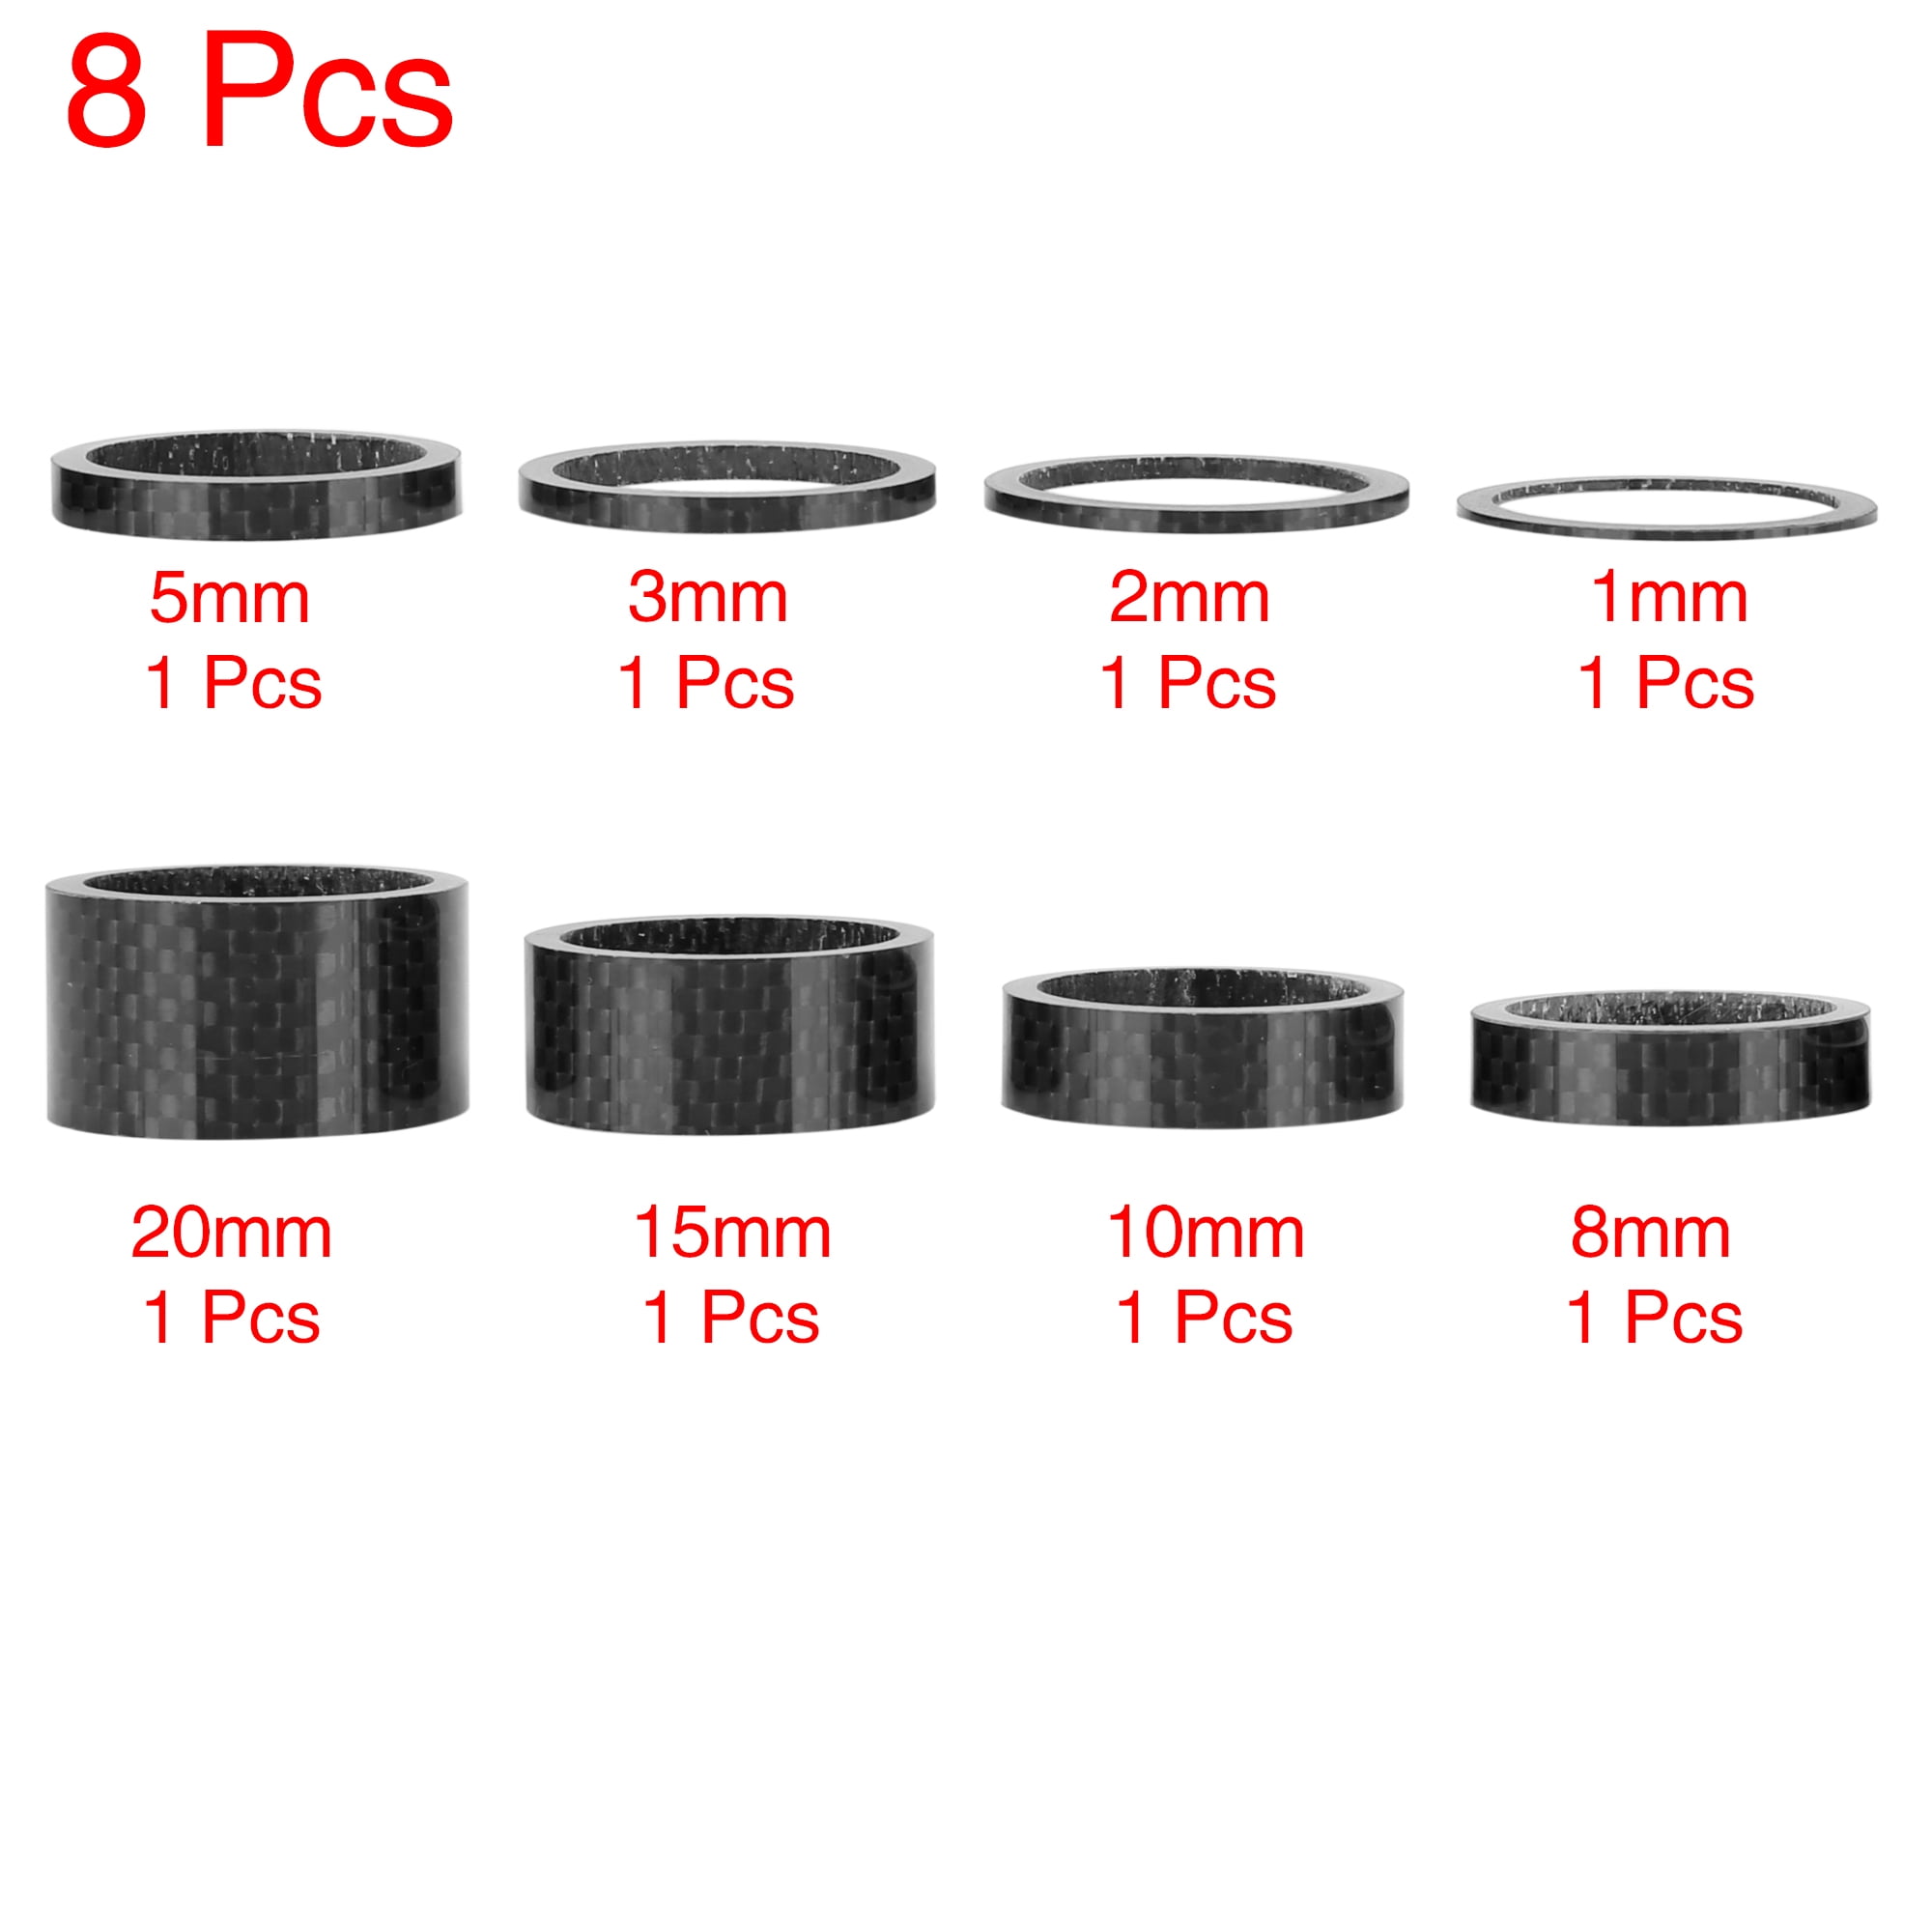 5pcs Headset Spacer Fit 1 1/8 Inch Stem for Bikes Cycling 3 5 10 15 20mm 